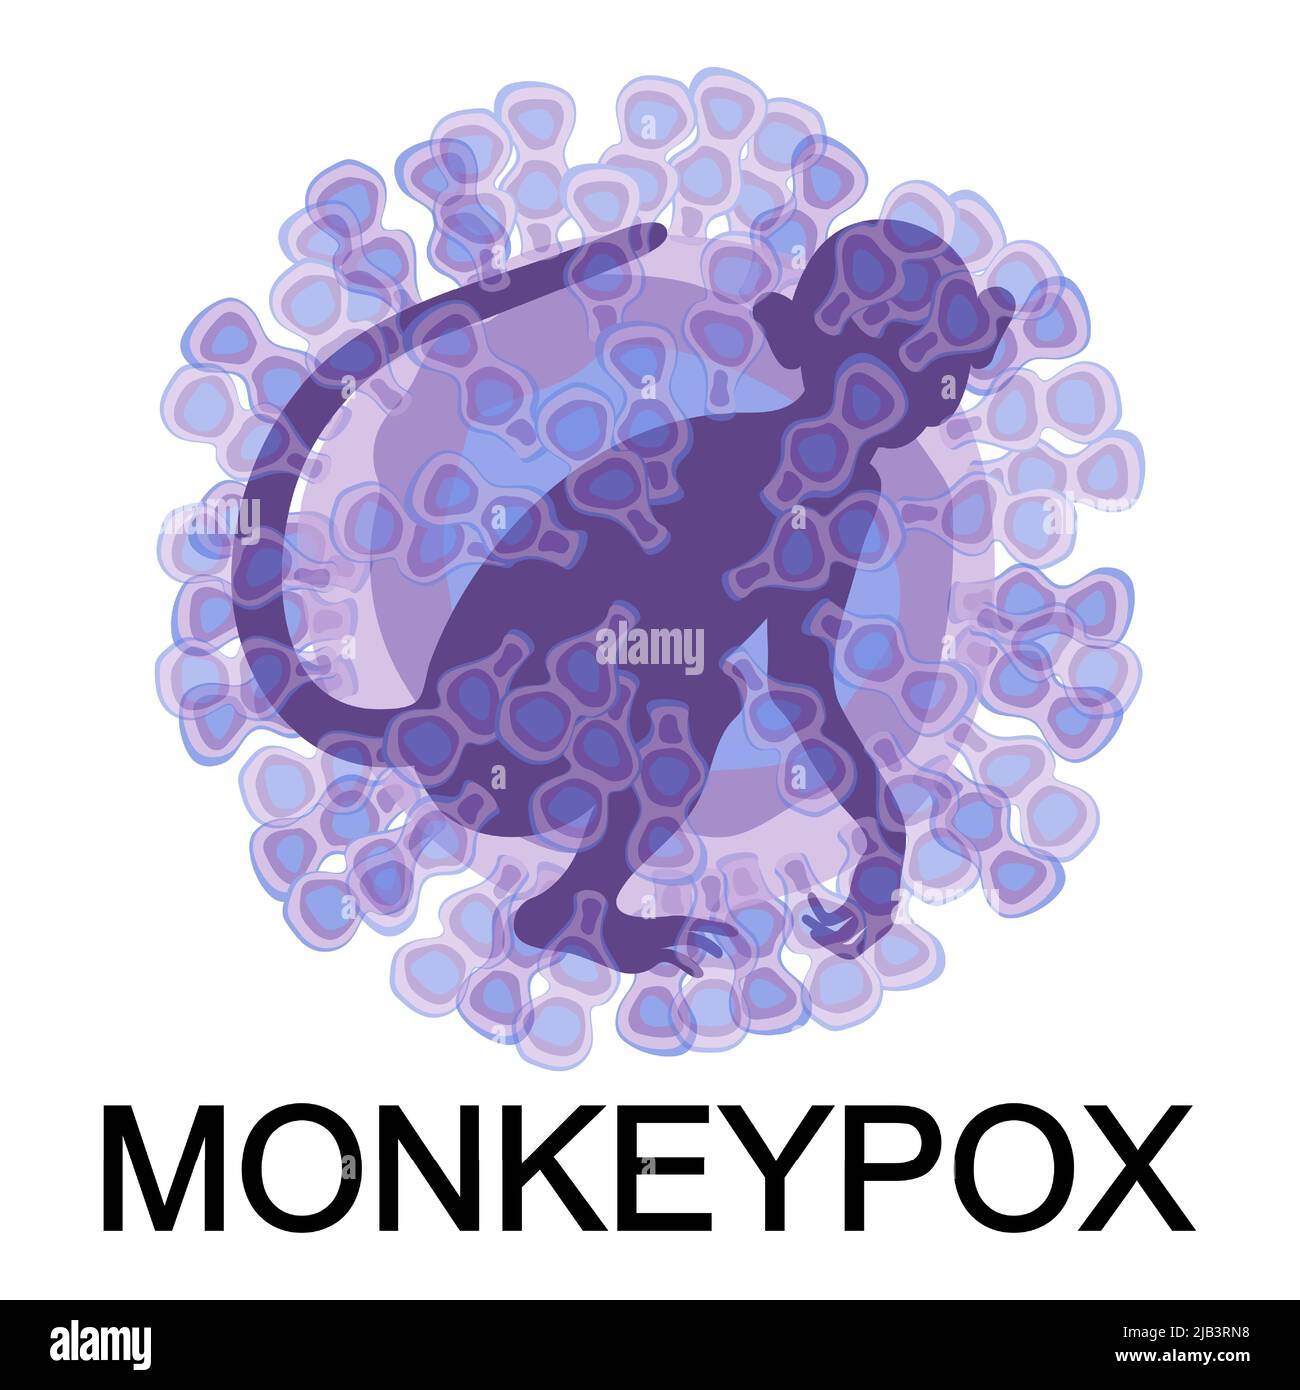 Monkeypox virus cell with monkey silhouette and text on white background. Virus disease concept. Microbiological background. Vector illustration. Stock Vector